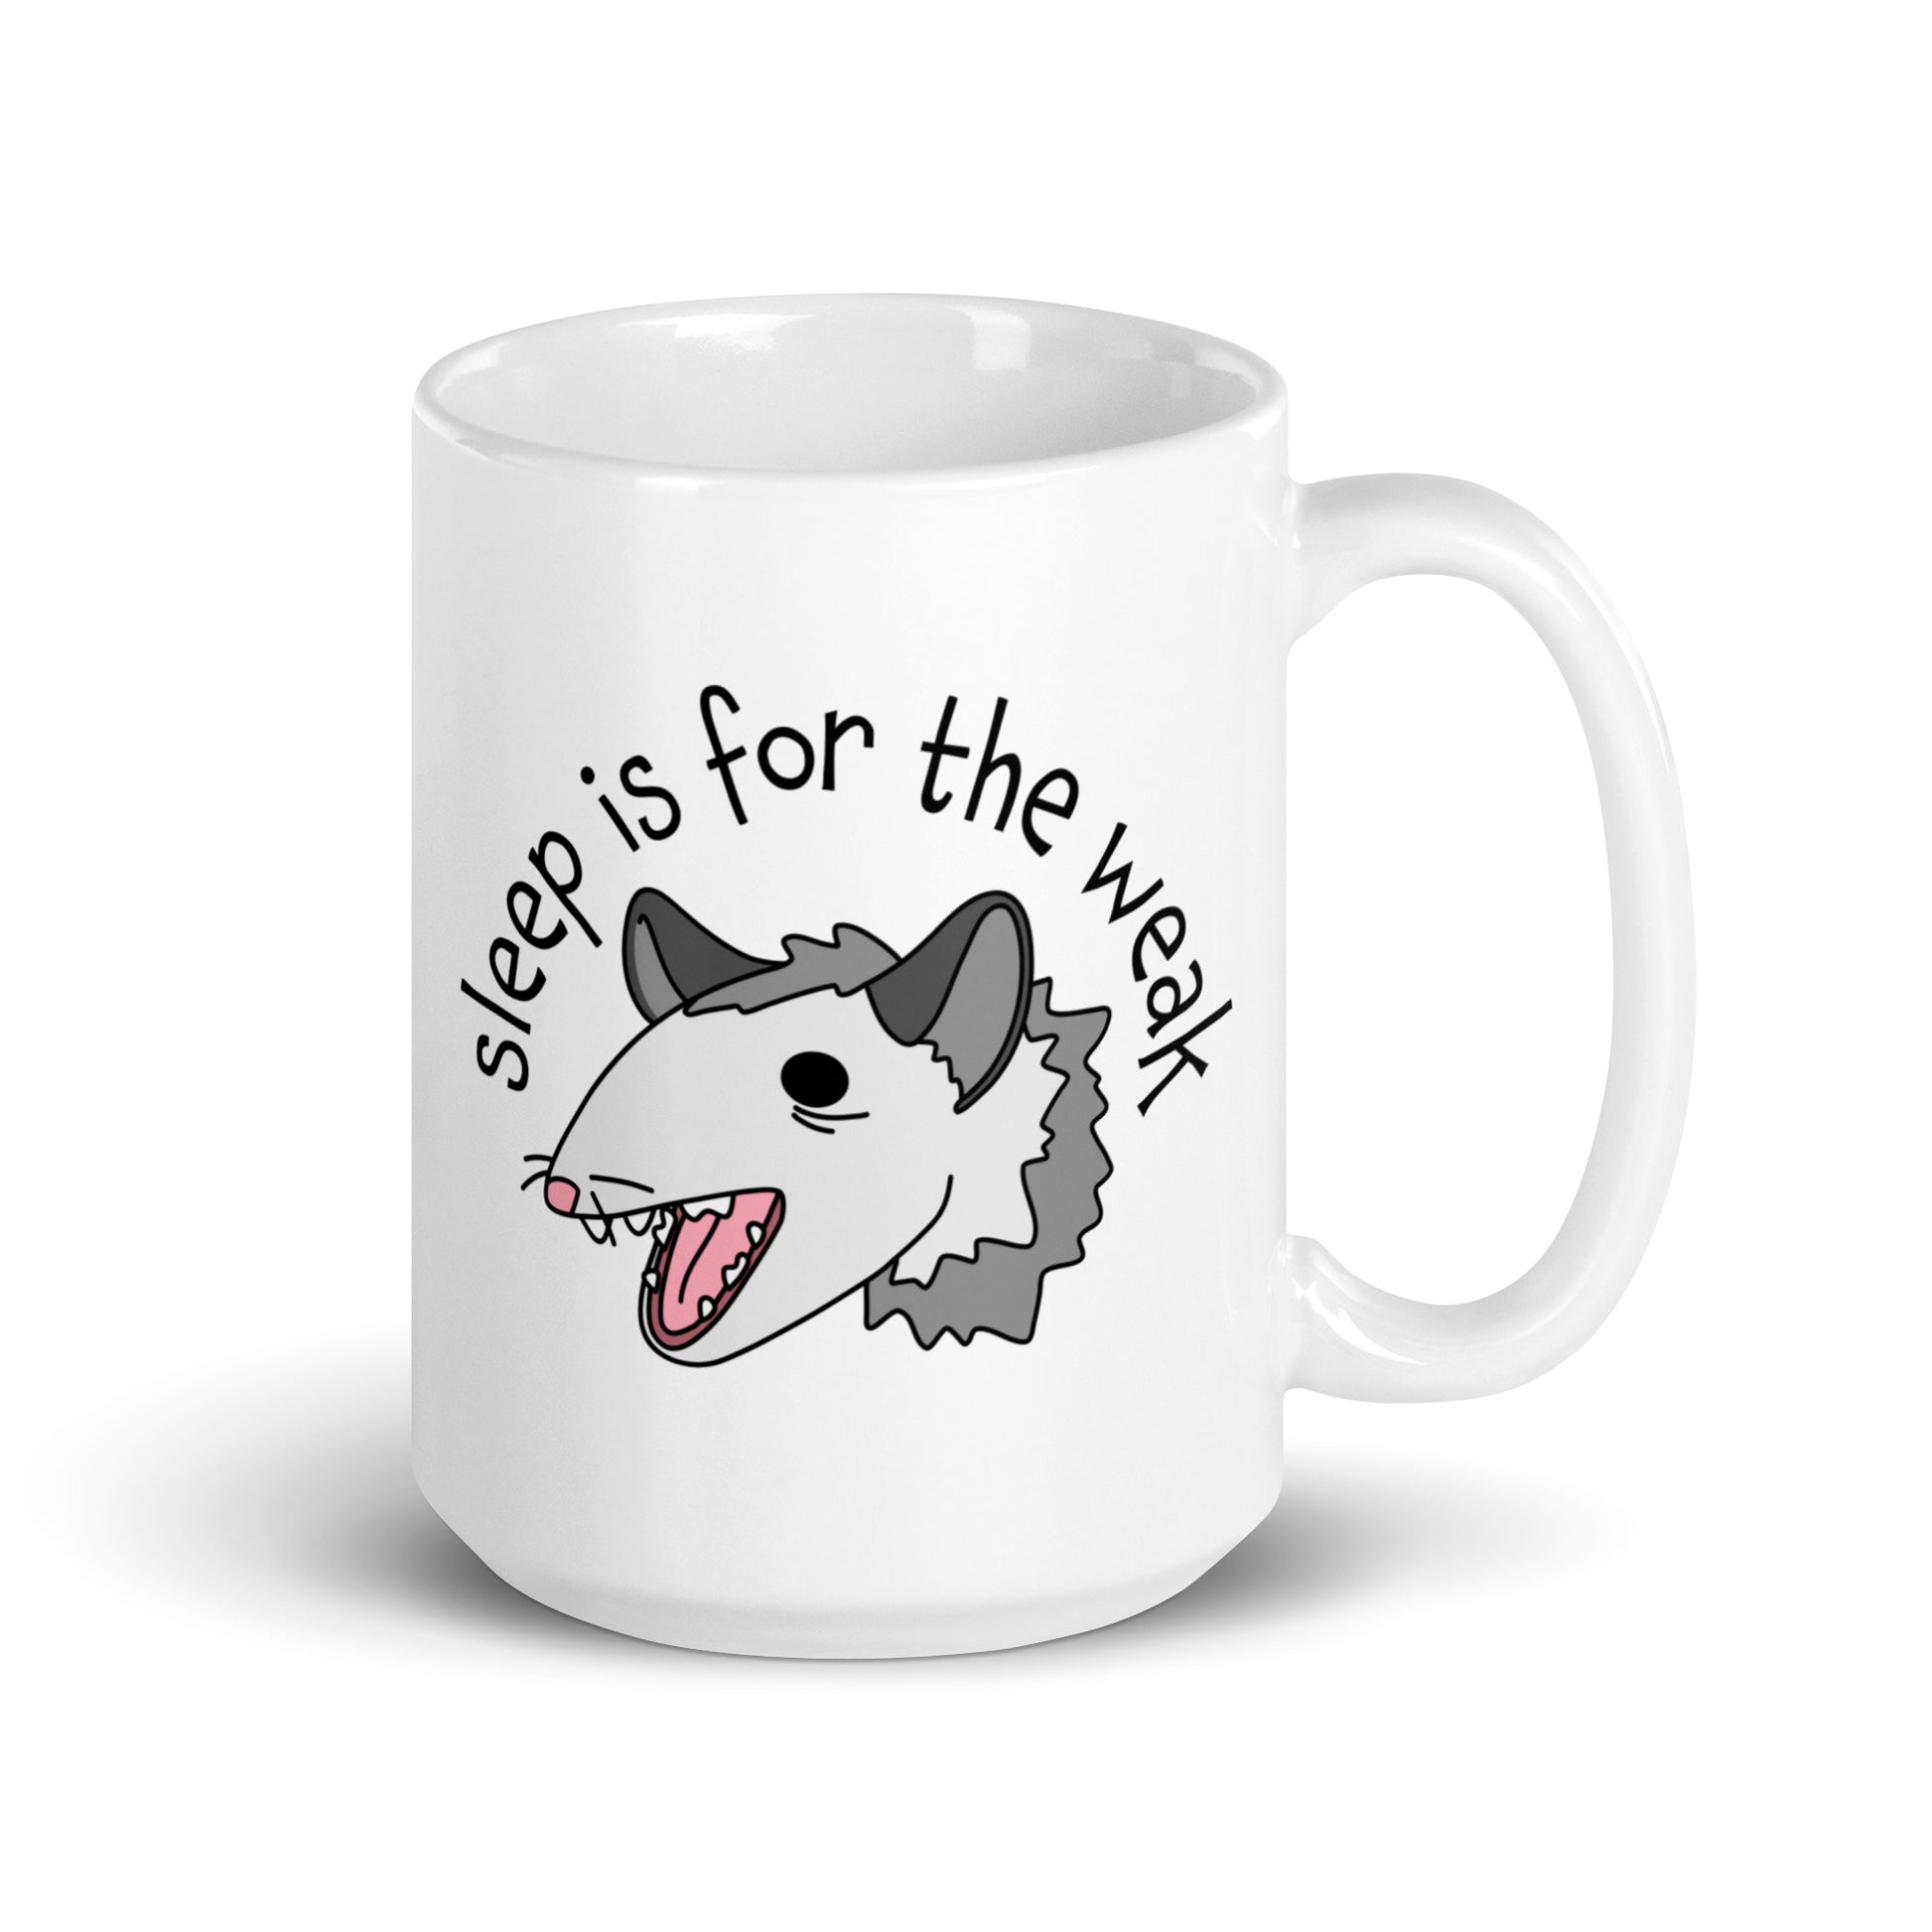 A white 15 ounce ceramic coffee mug featuring an illustration of an opossum with its mouth open, as if it was yelling. Text alongside the opossum reads "sleep is for the weak"